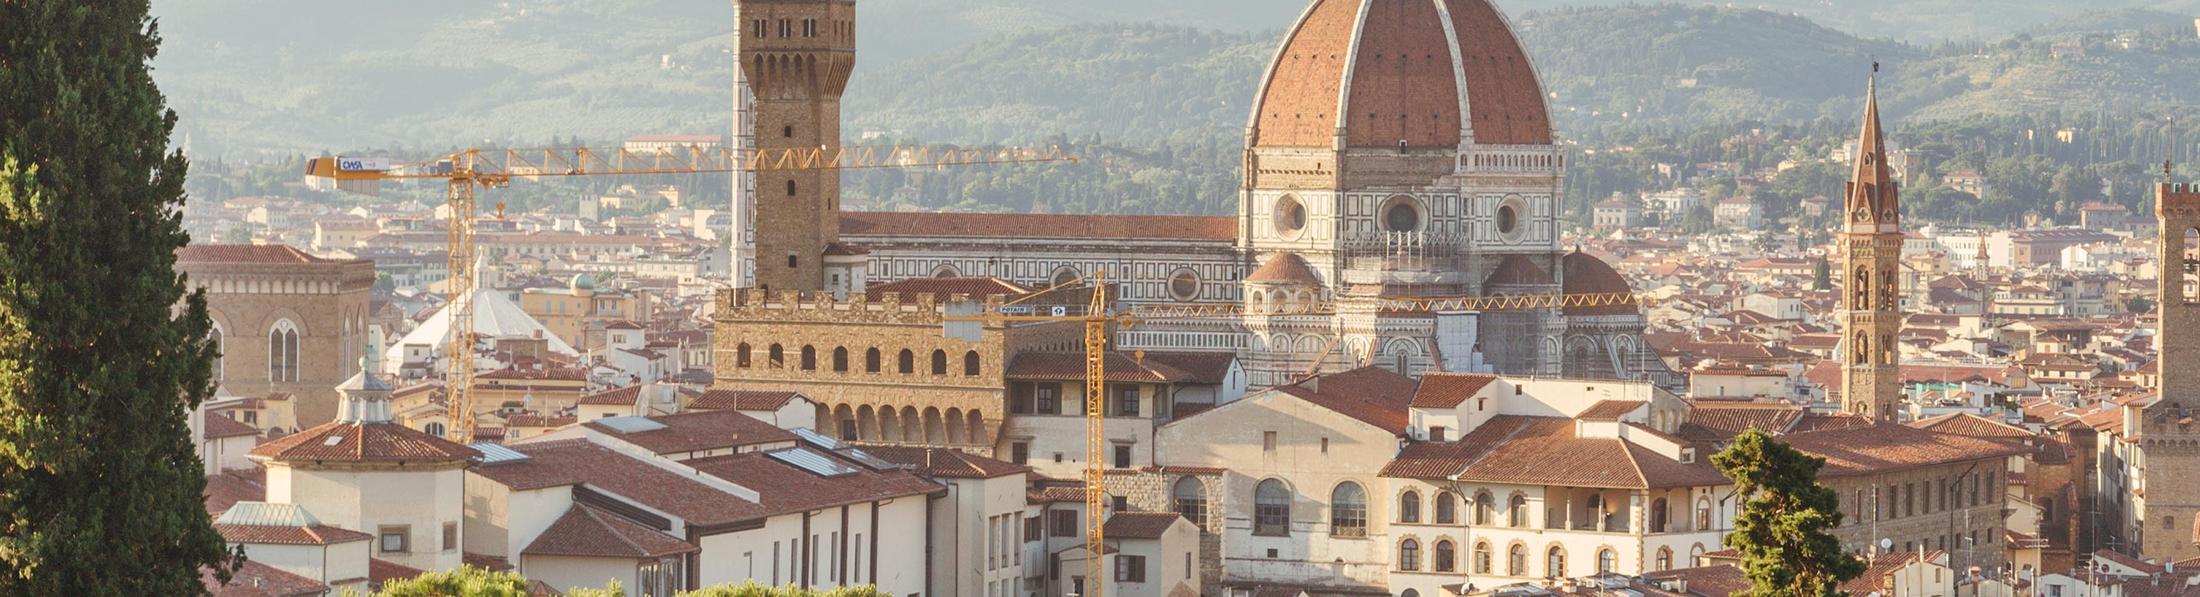 FLORENCE - ITALY